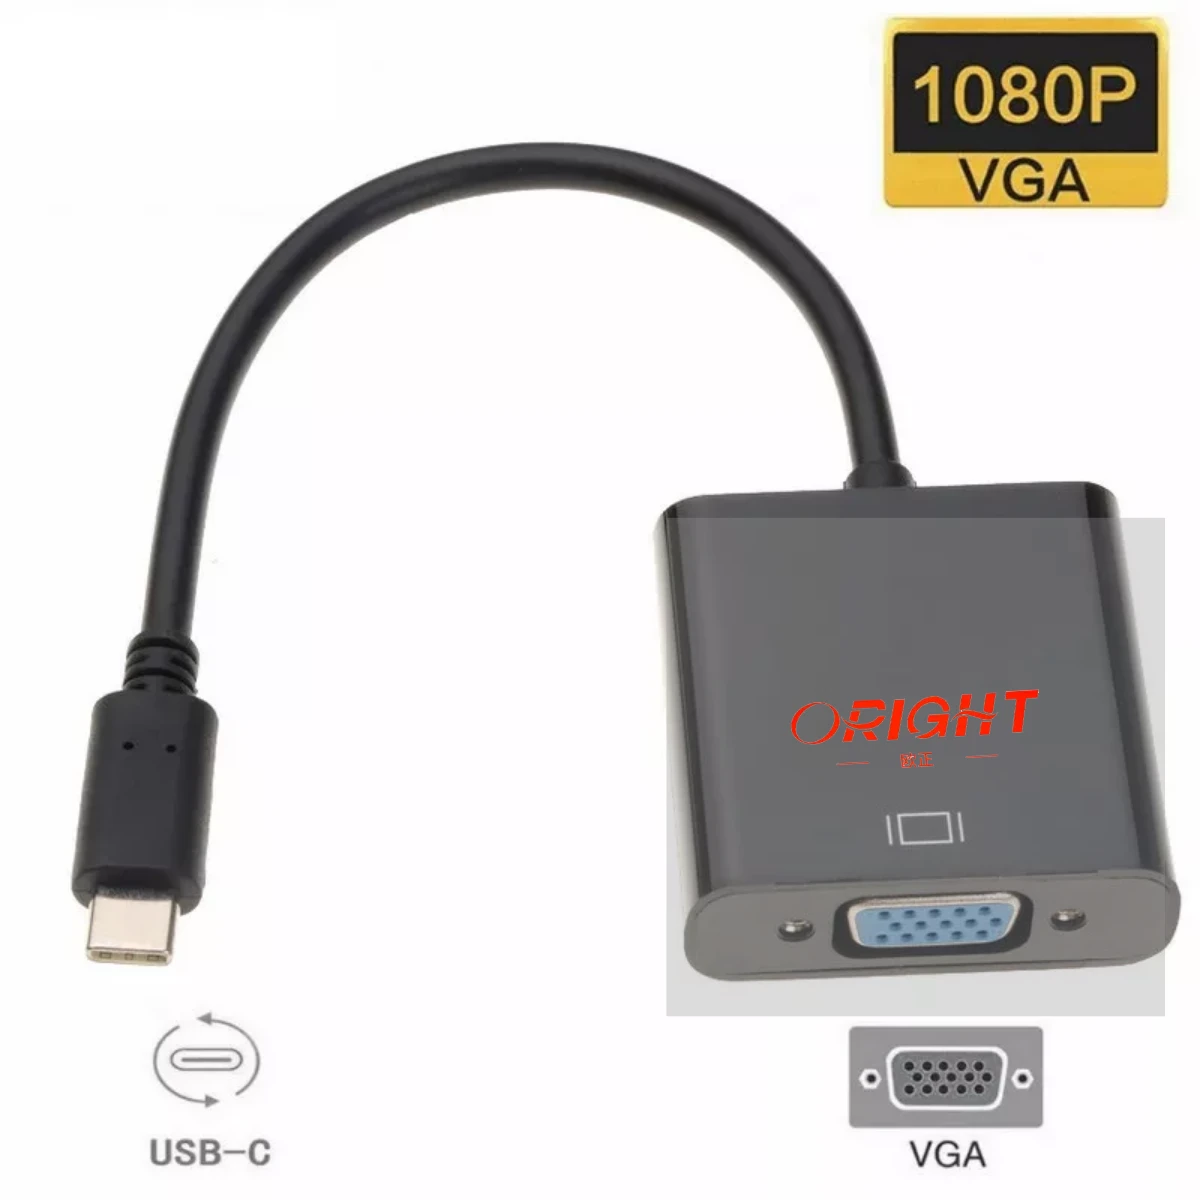 1.2M 4FT Full HD 1080P VGA to HDMI Adapter VGA2HDMI Audio Video Converter Cable with 3.5mm Audio for HDTV PC Monitor Projector